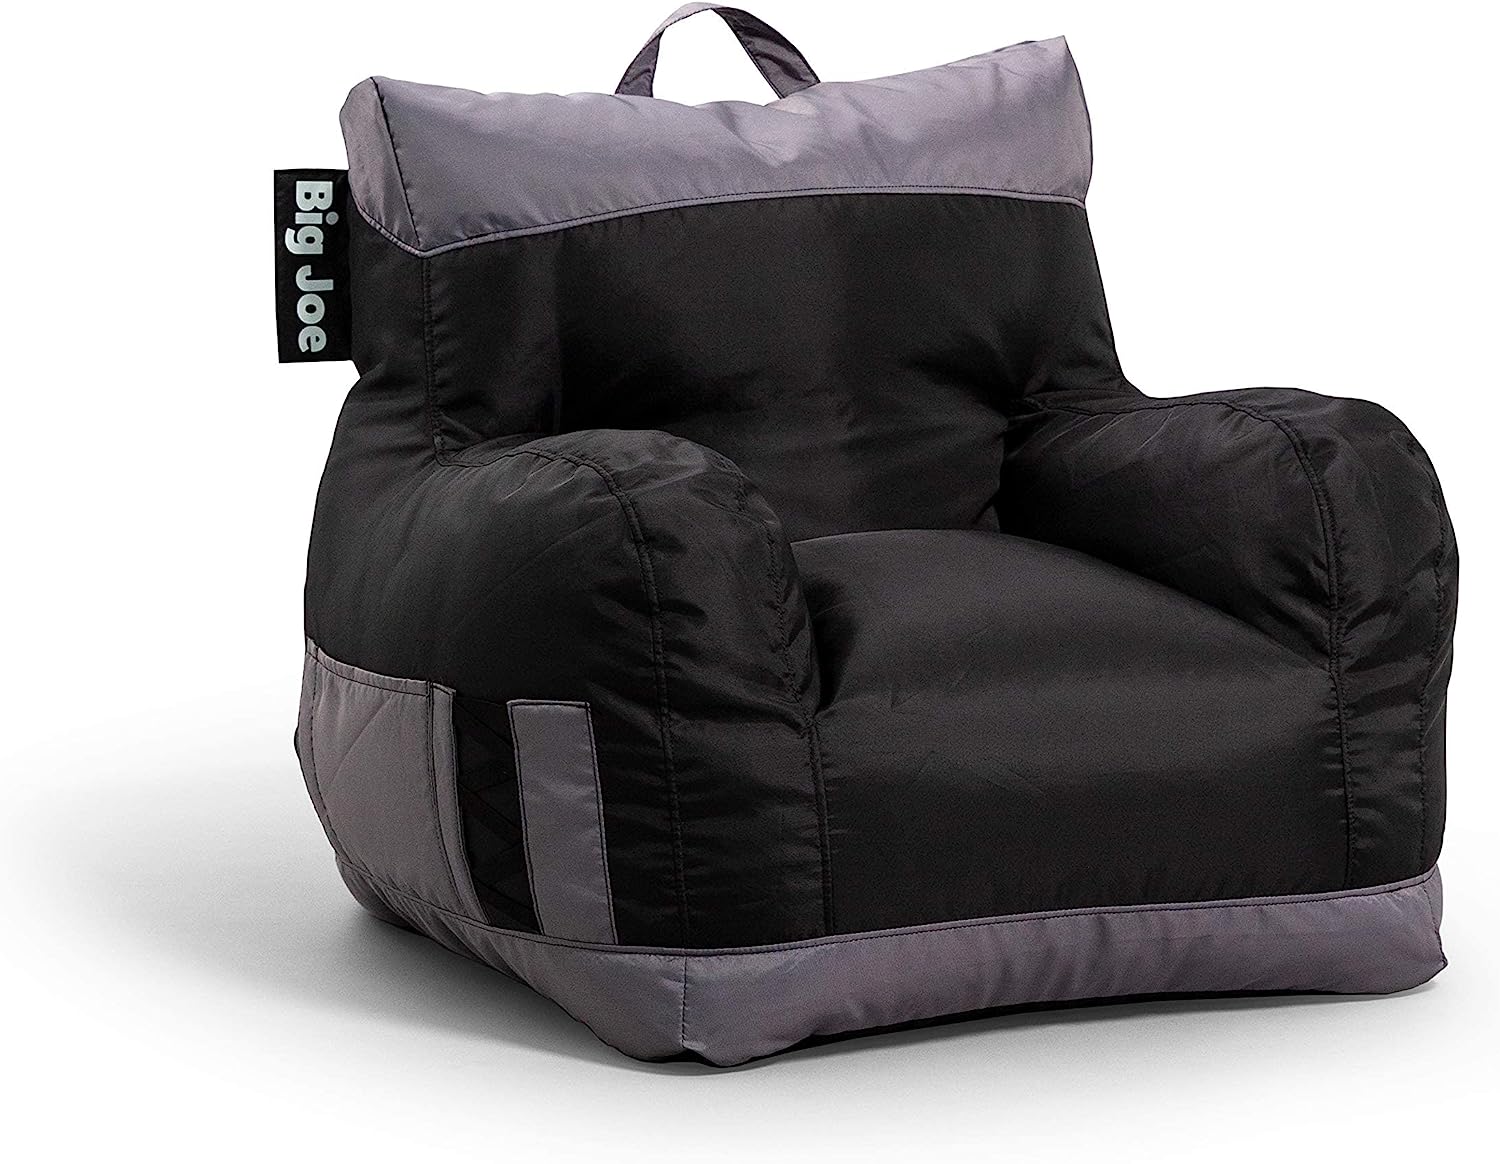 Big Joe Dorm Bean Bag Chair with Drink Holder and [...]